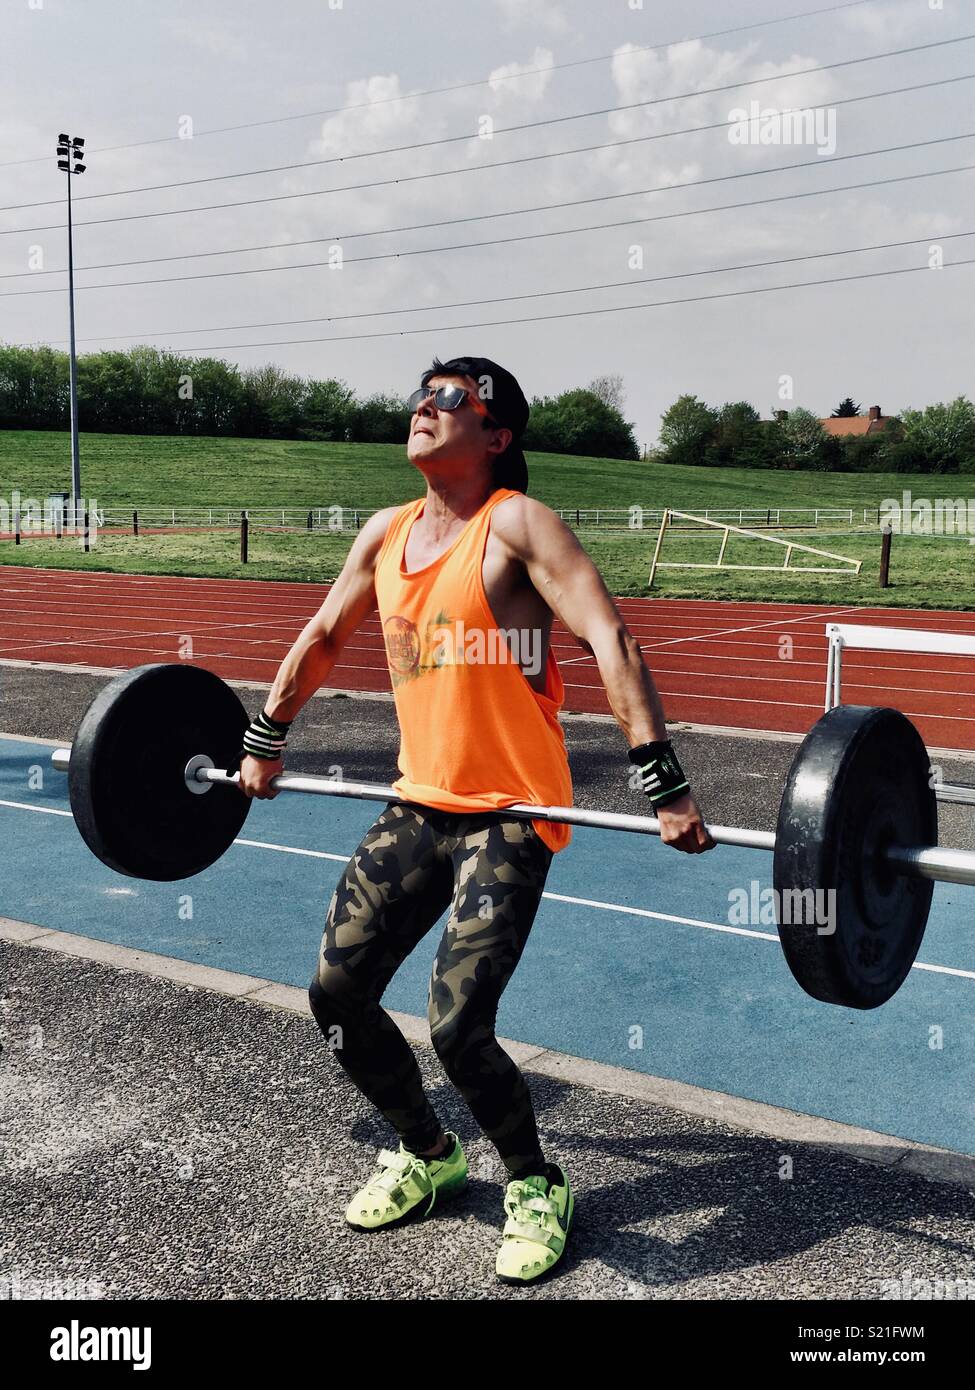 Olympic Weightlifter performing a snatch on a sunny day. Stock Photo